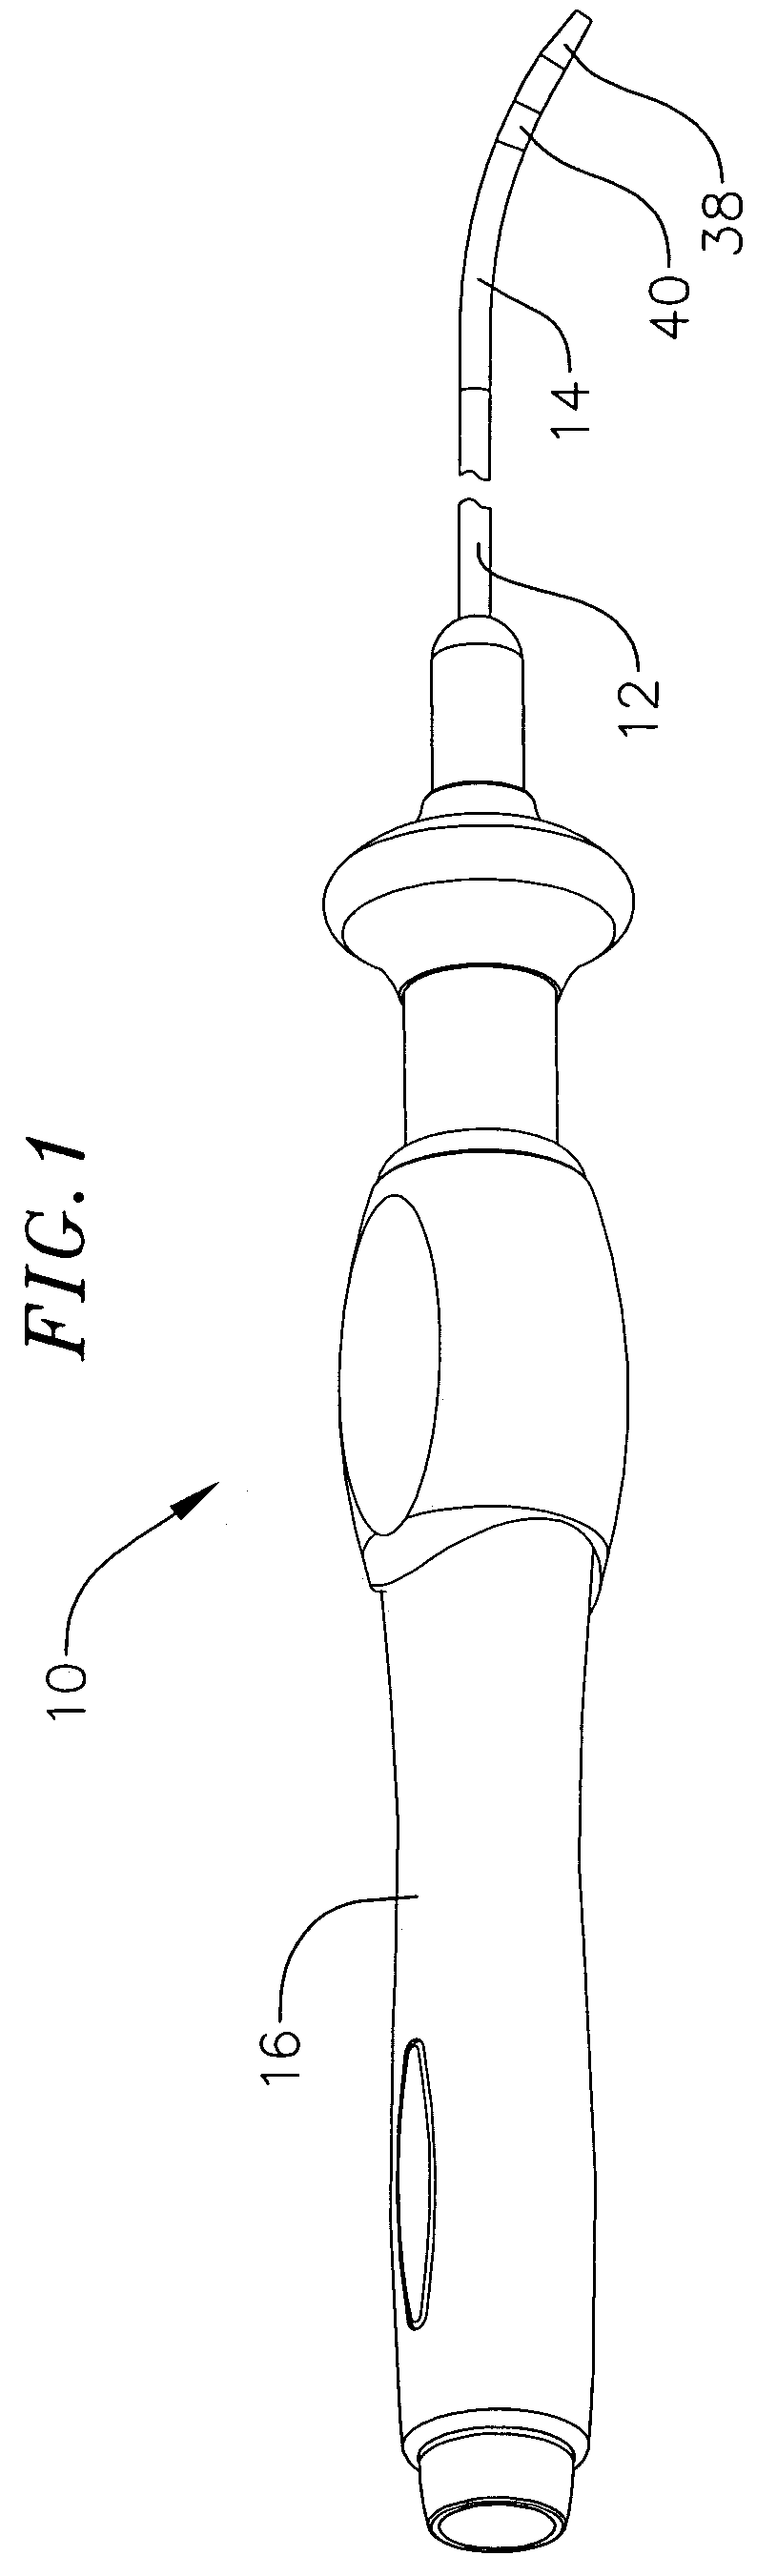 Bidirectional steerable catheter with slidable mated puller wires